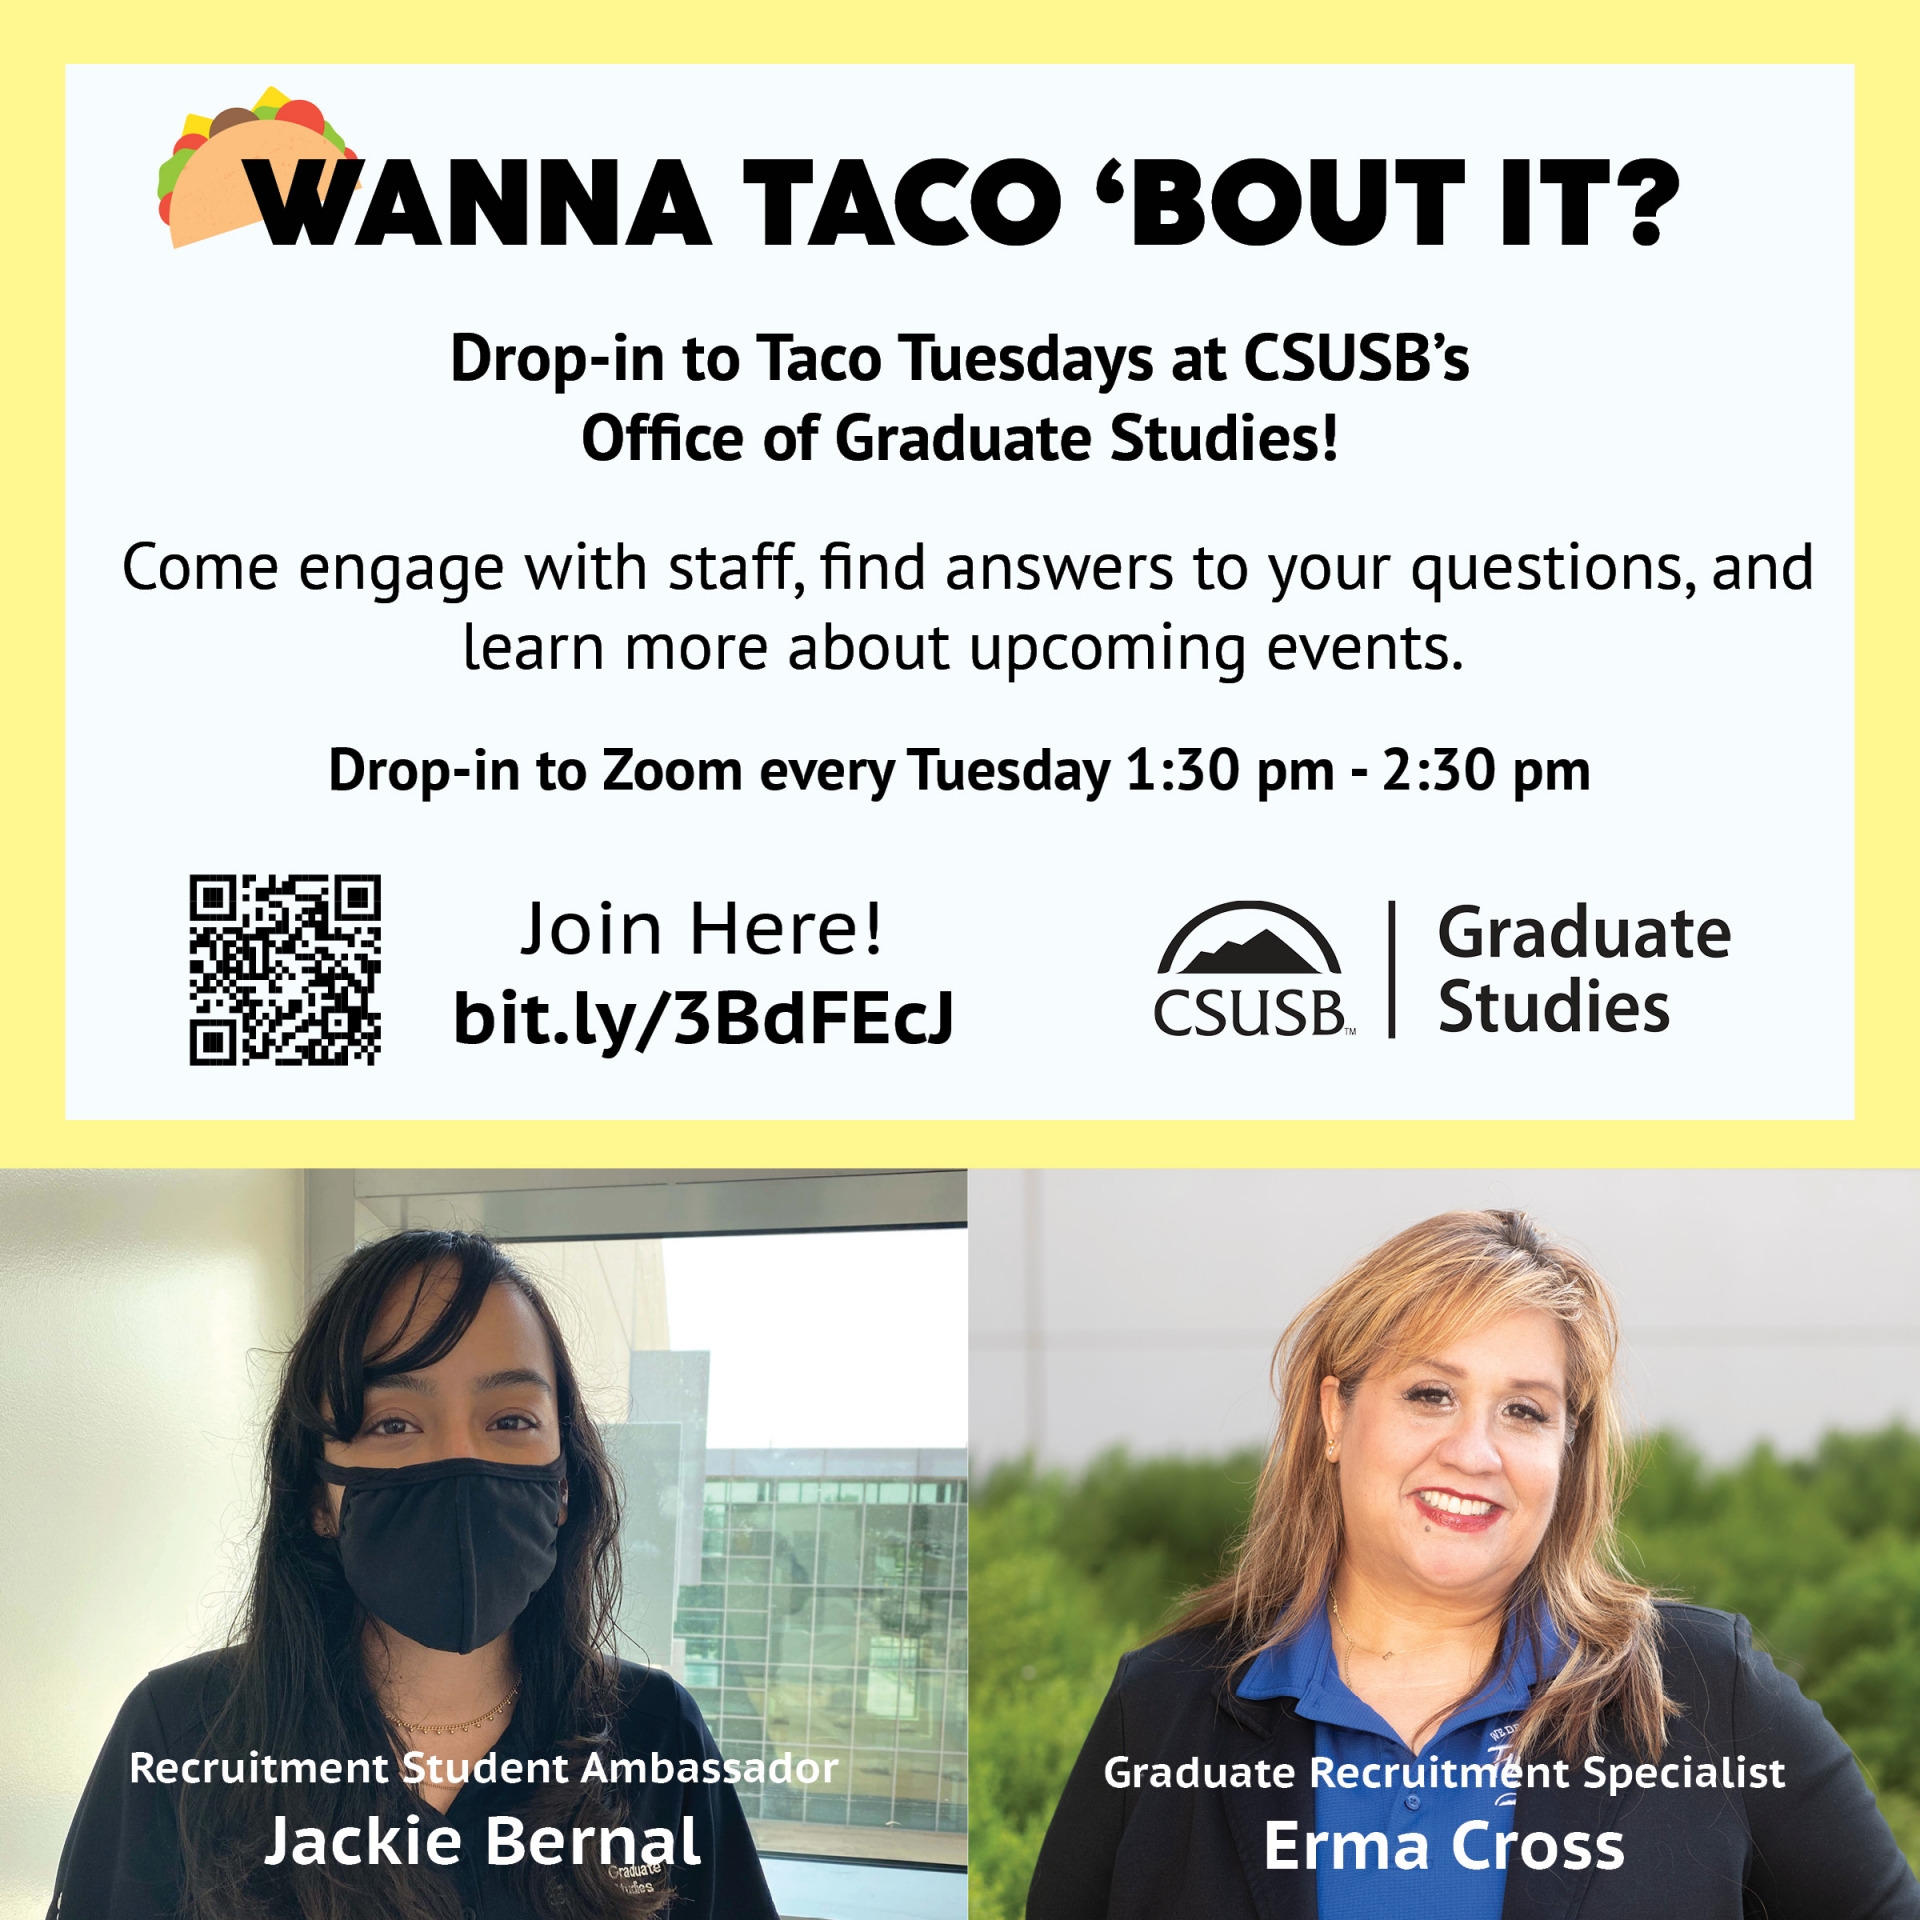 Taco Tuesday chat session at Grad Studies